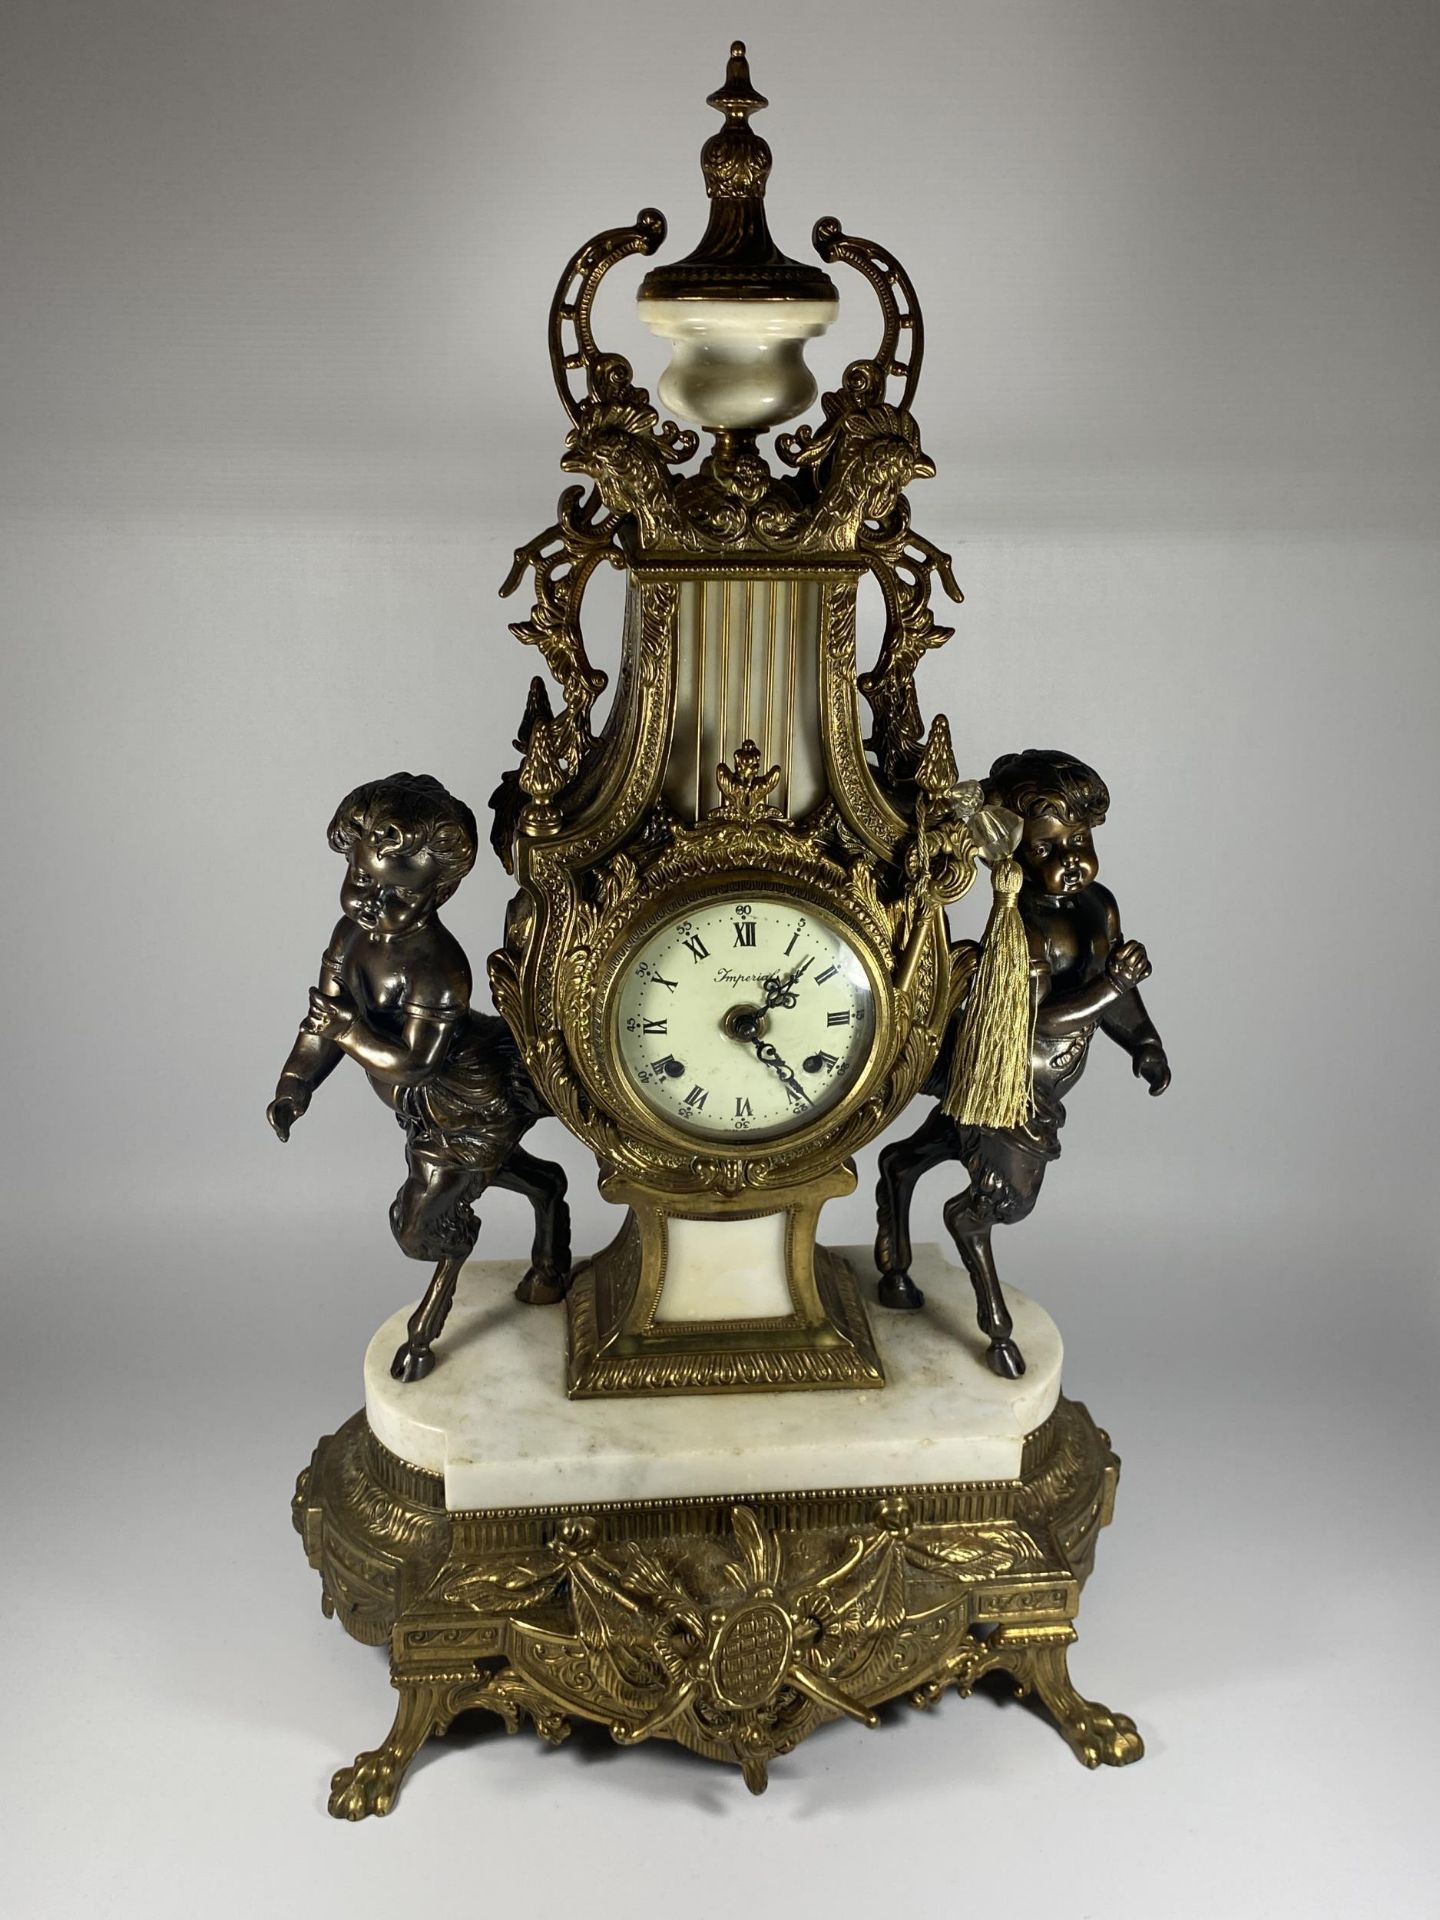 A C.1900 ITALIAN REPRODUCTION MANTLE CLOCK BY IMPERIAL IN BRASS WITH MARBLE BASE AND CHERUBS, HEIGHT